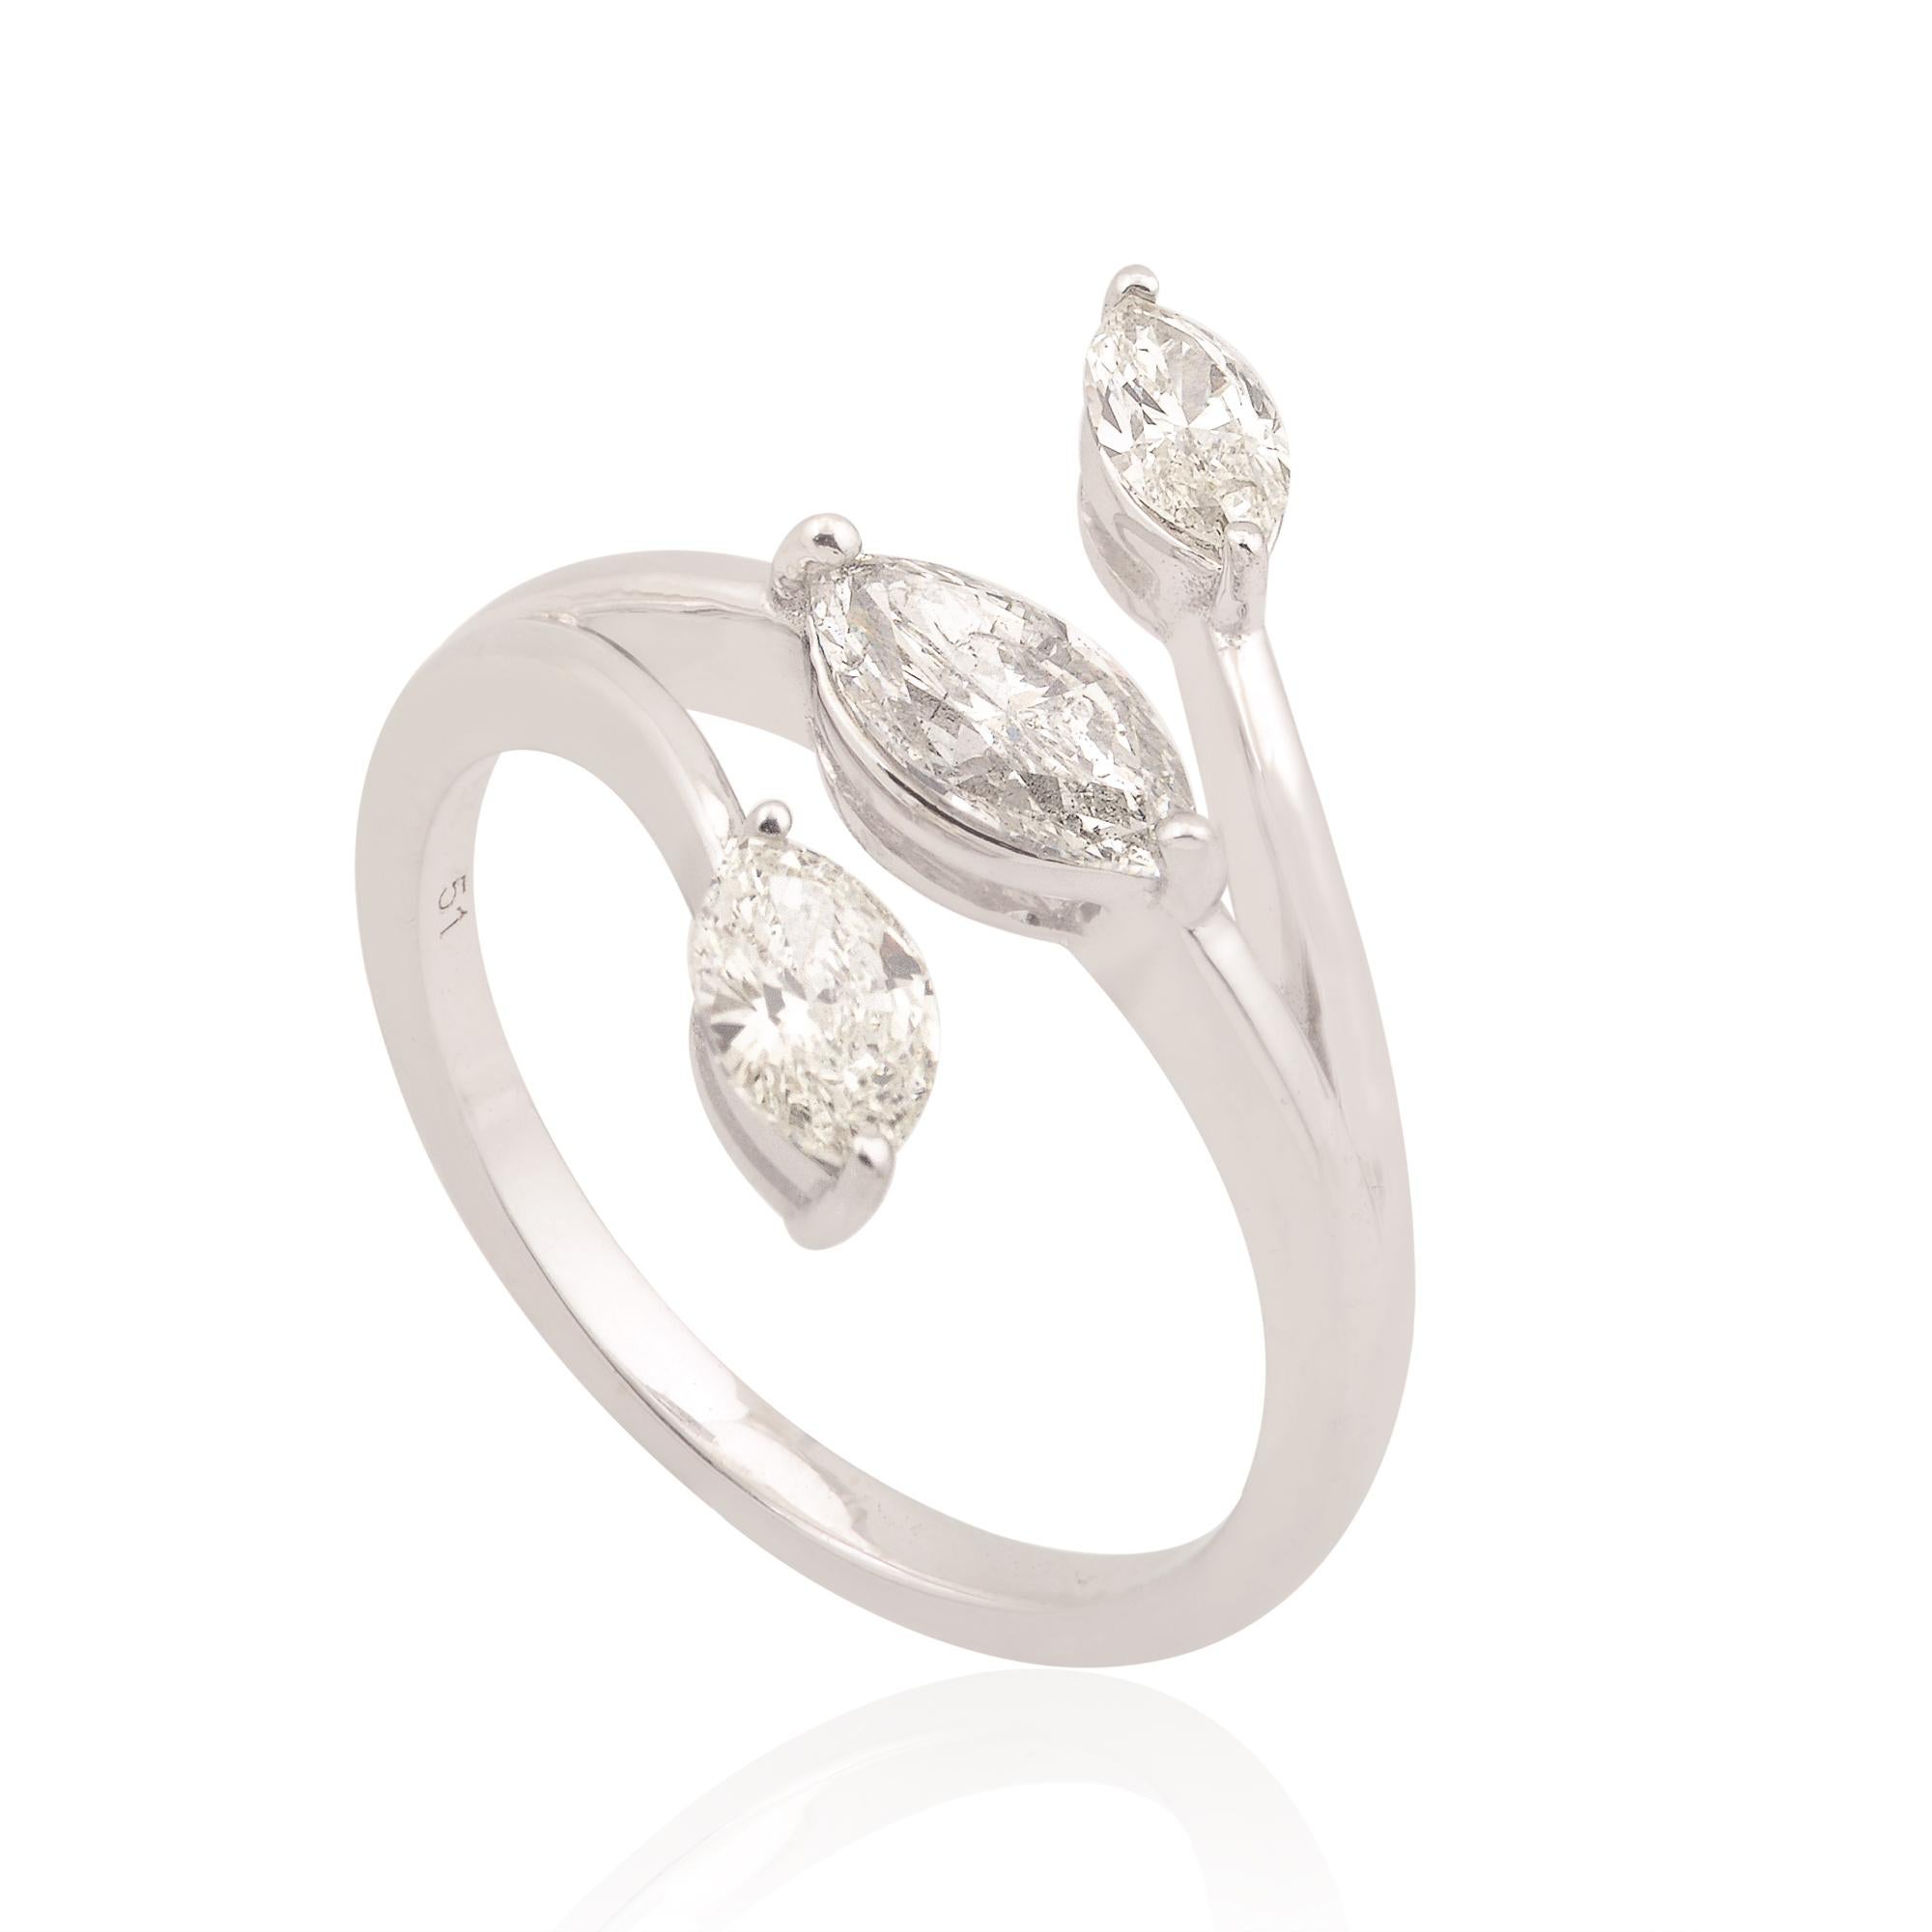 For Sale:  1.11 Carat Marquise Diamond Leaf Ring Solid 18k White Gold Handmade Fine Jewelry 3